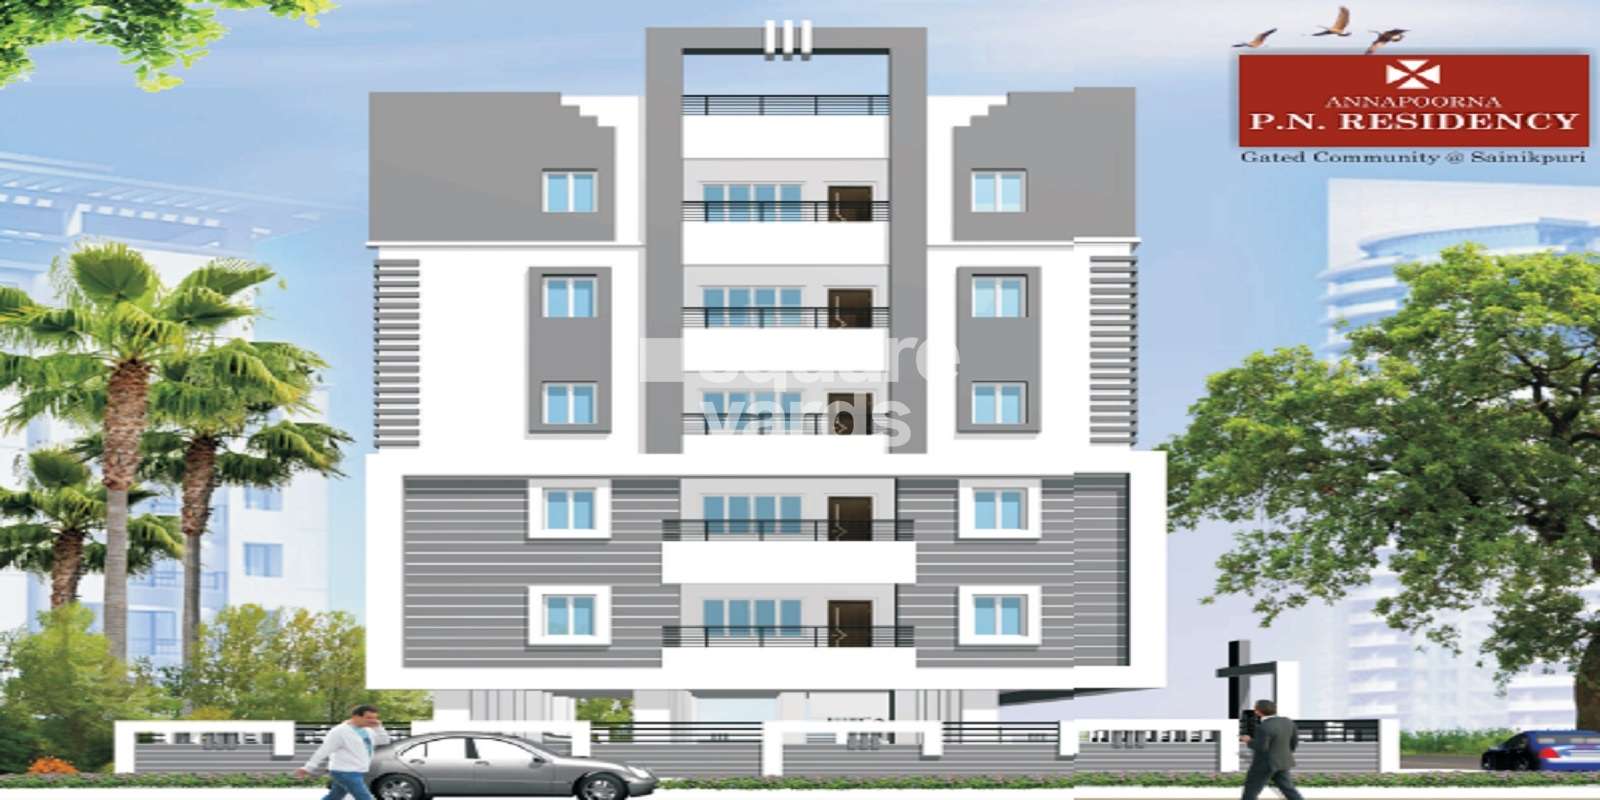 Annapoorna PN Residency Cover Image